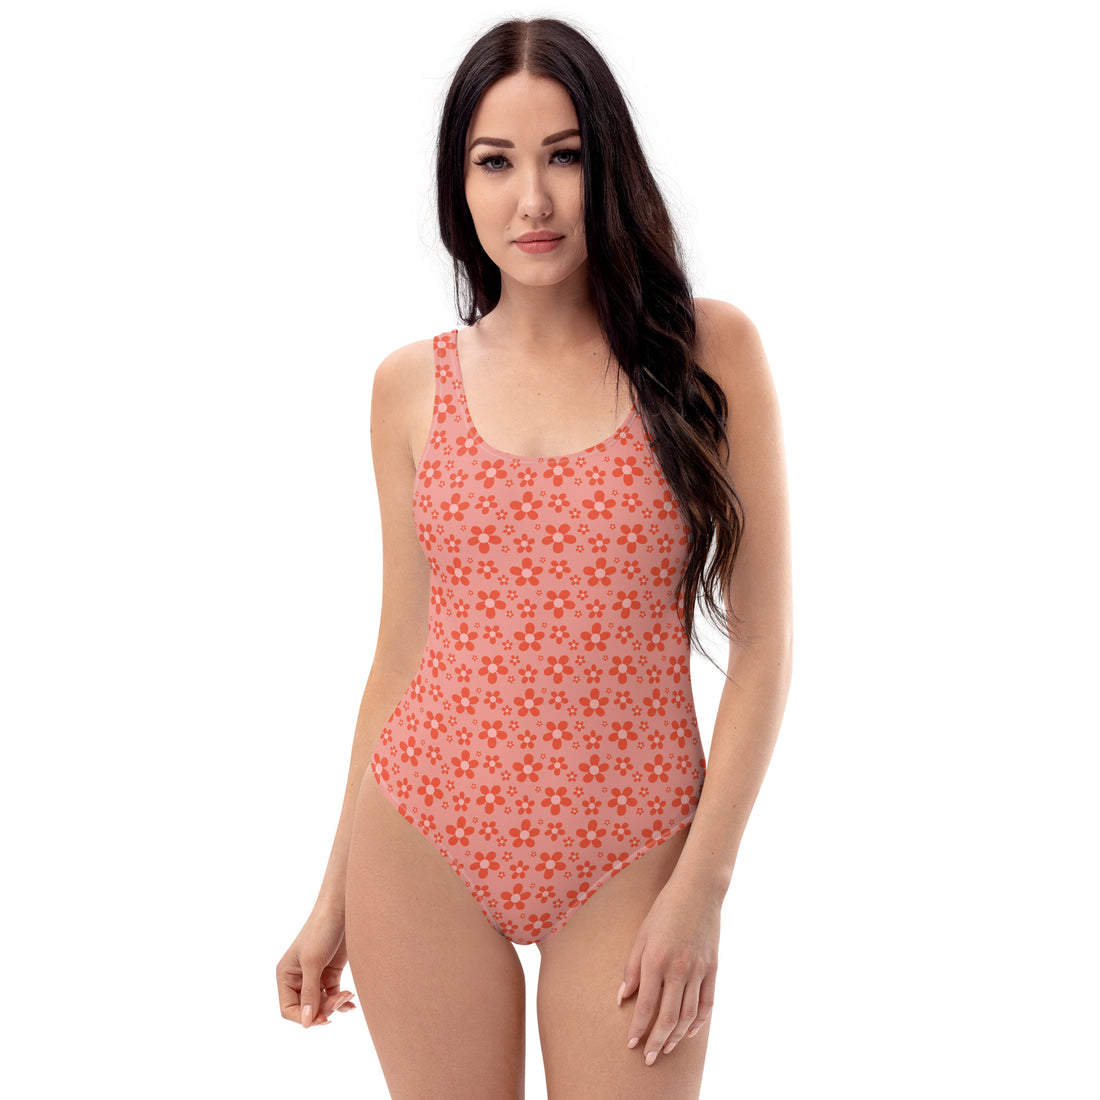 Monochrome Red One-Piece Swimsuit